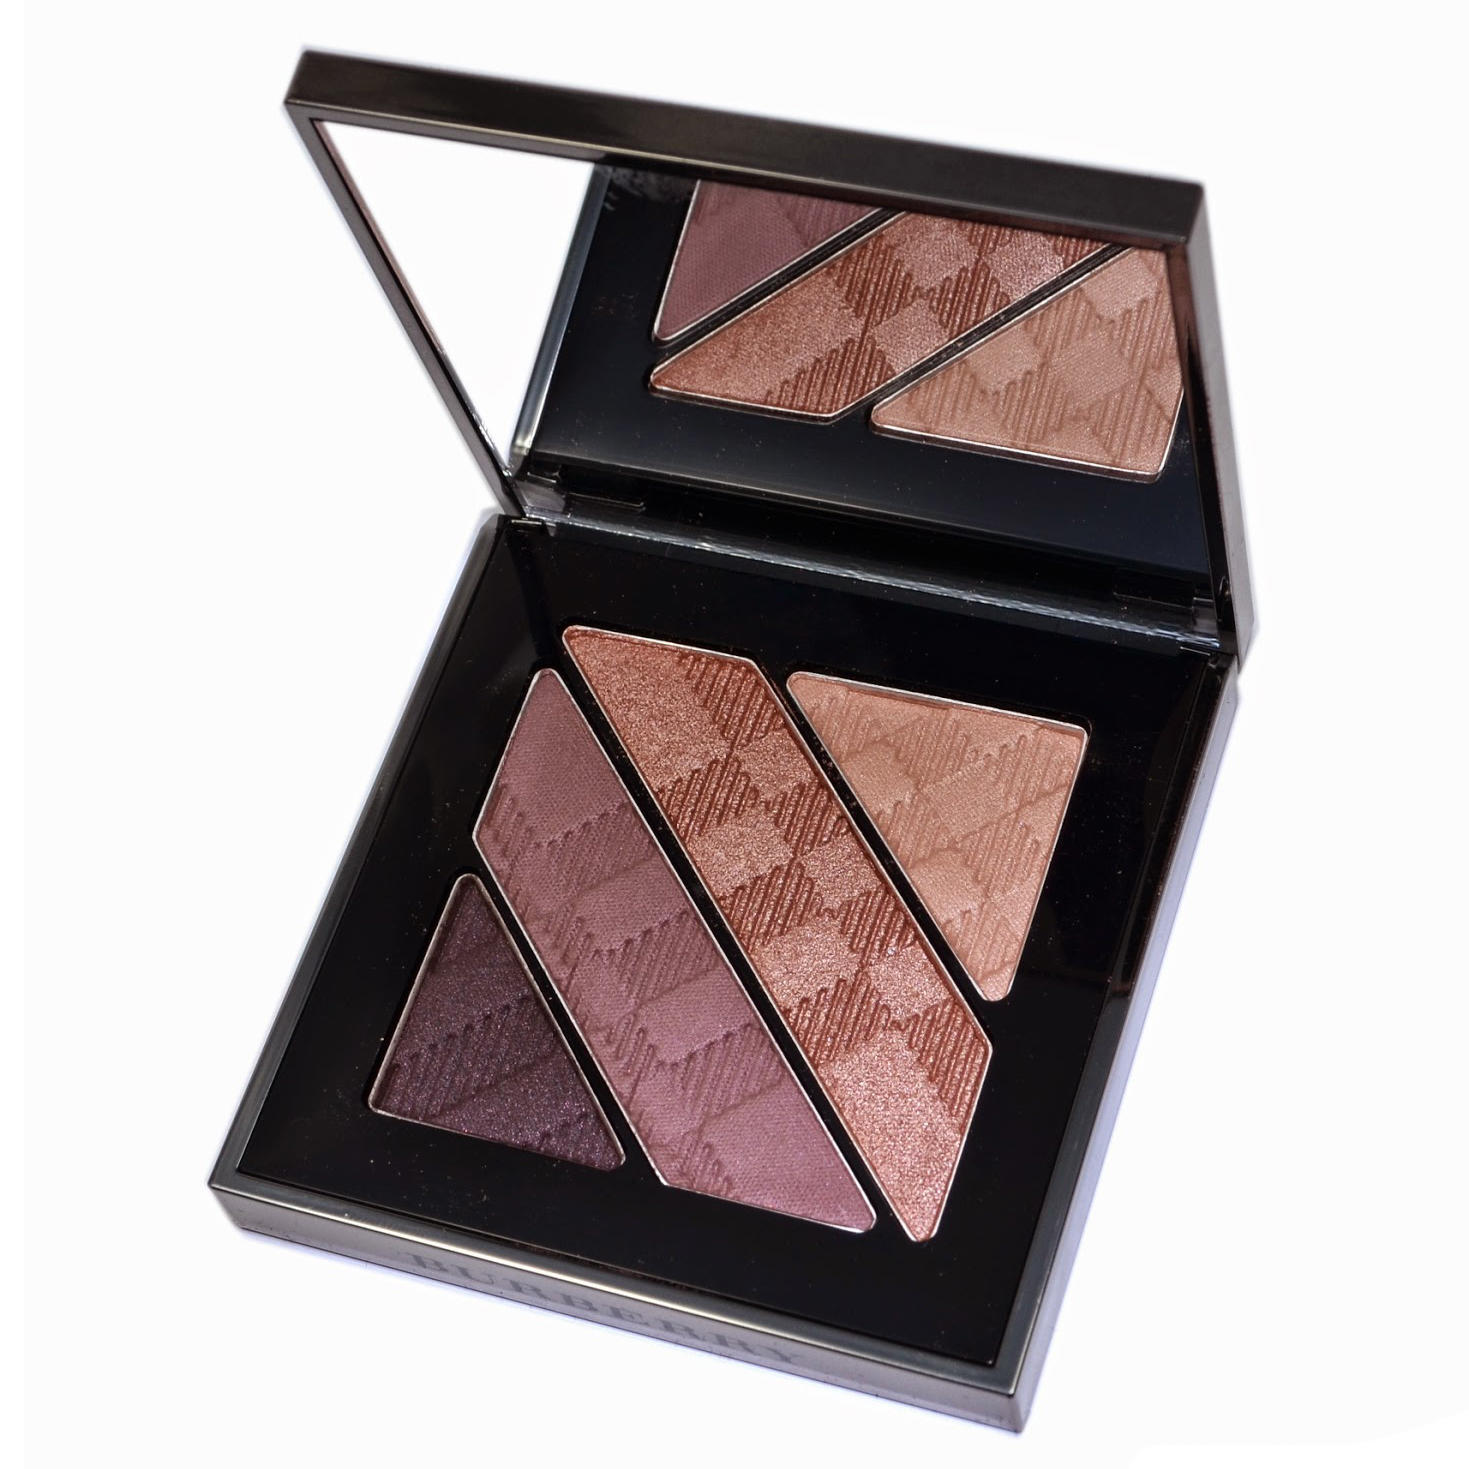 Burberry Complete Eyeshadow Palette Nude Blush No. 12